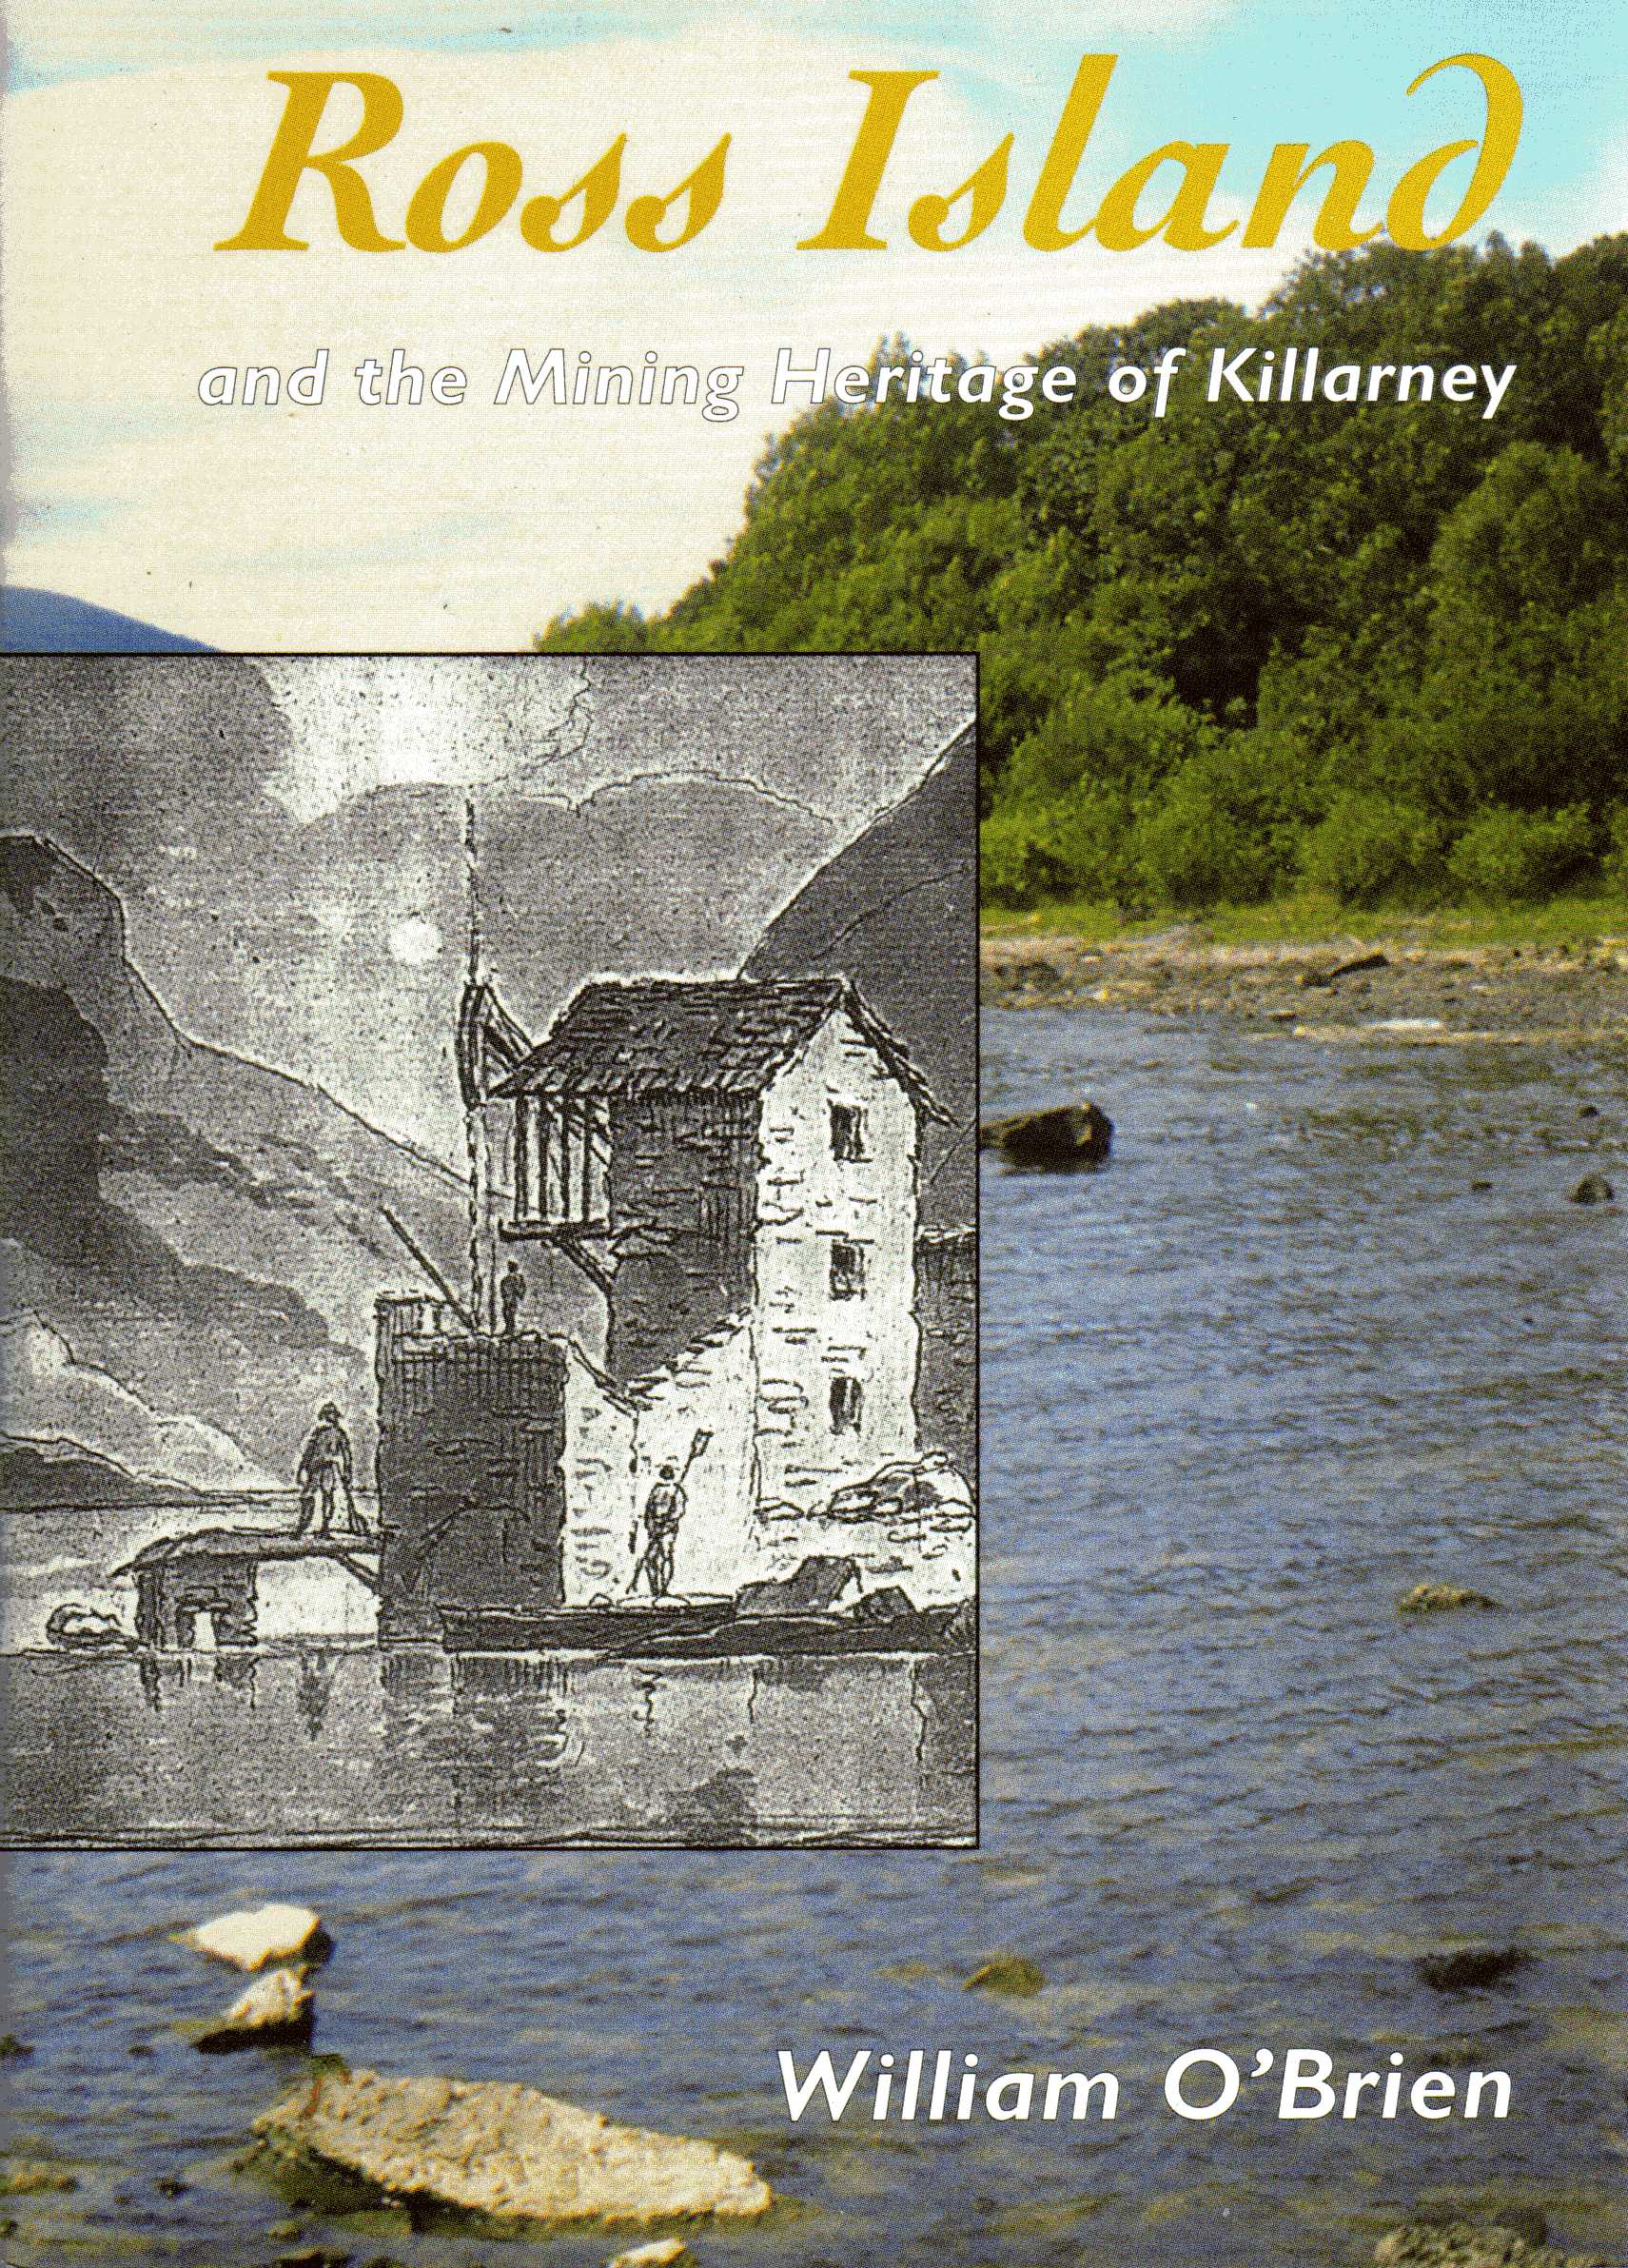 [USED] Ross Island and the Mining Heritage of Killarney